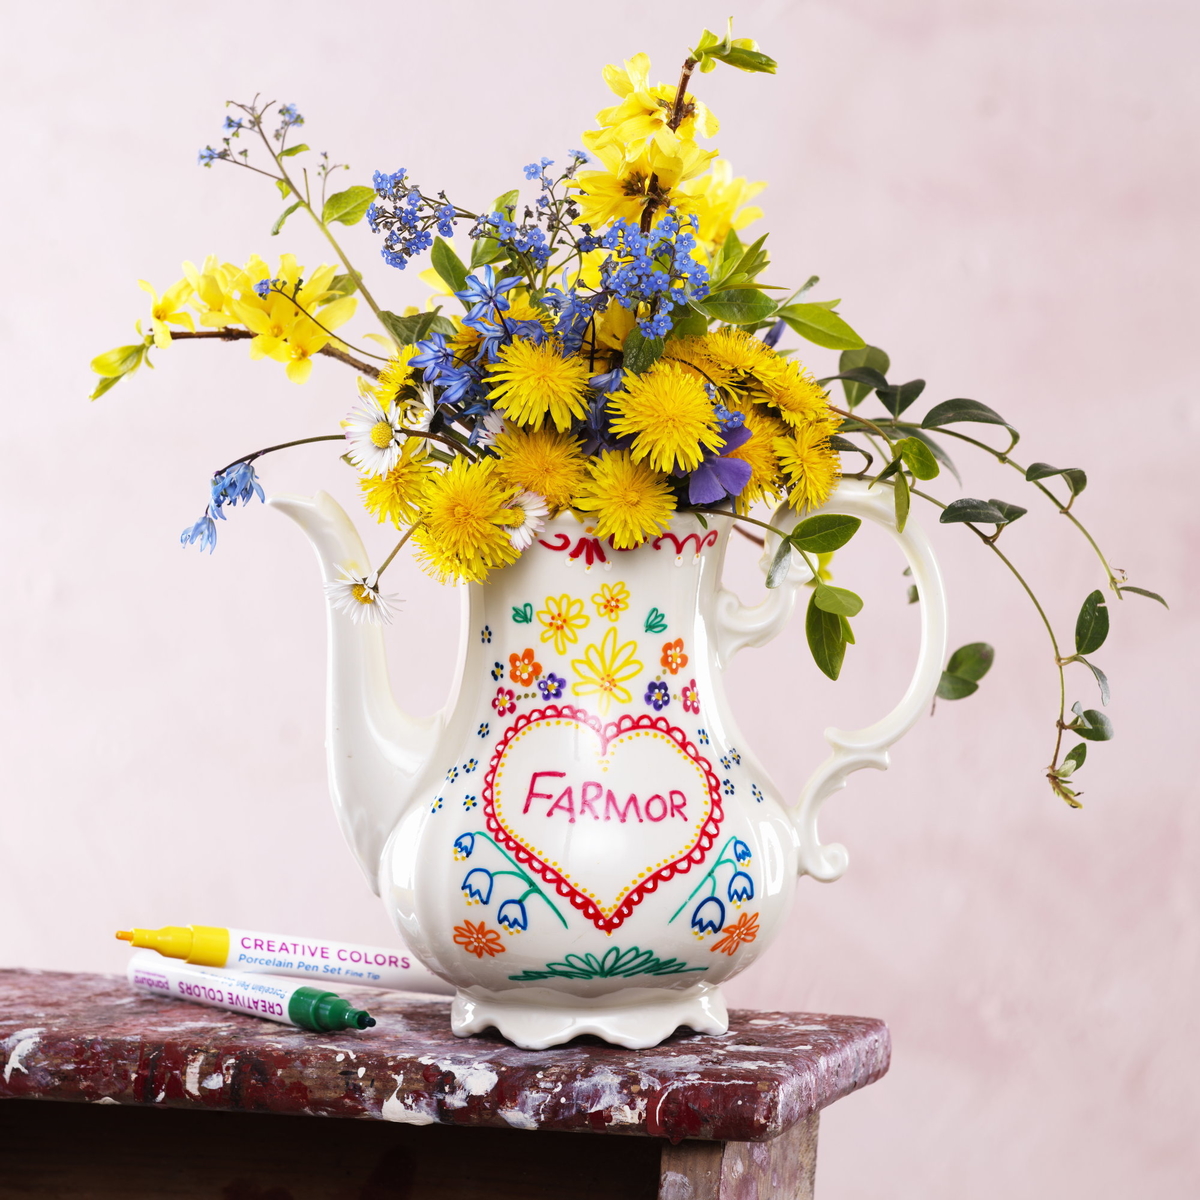 Make painted porcelain gifts